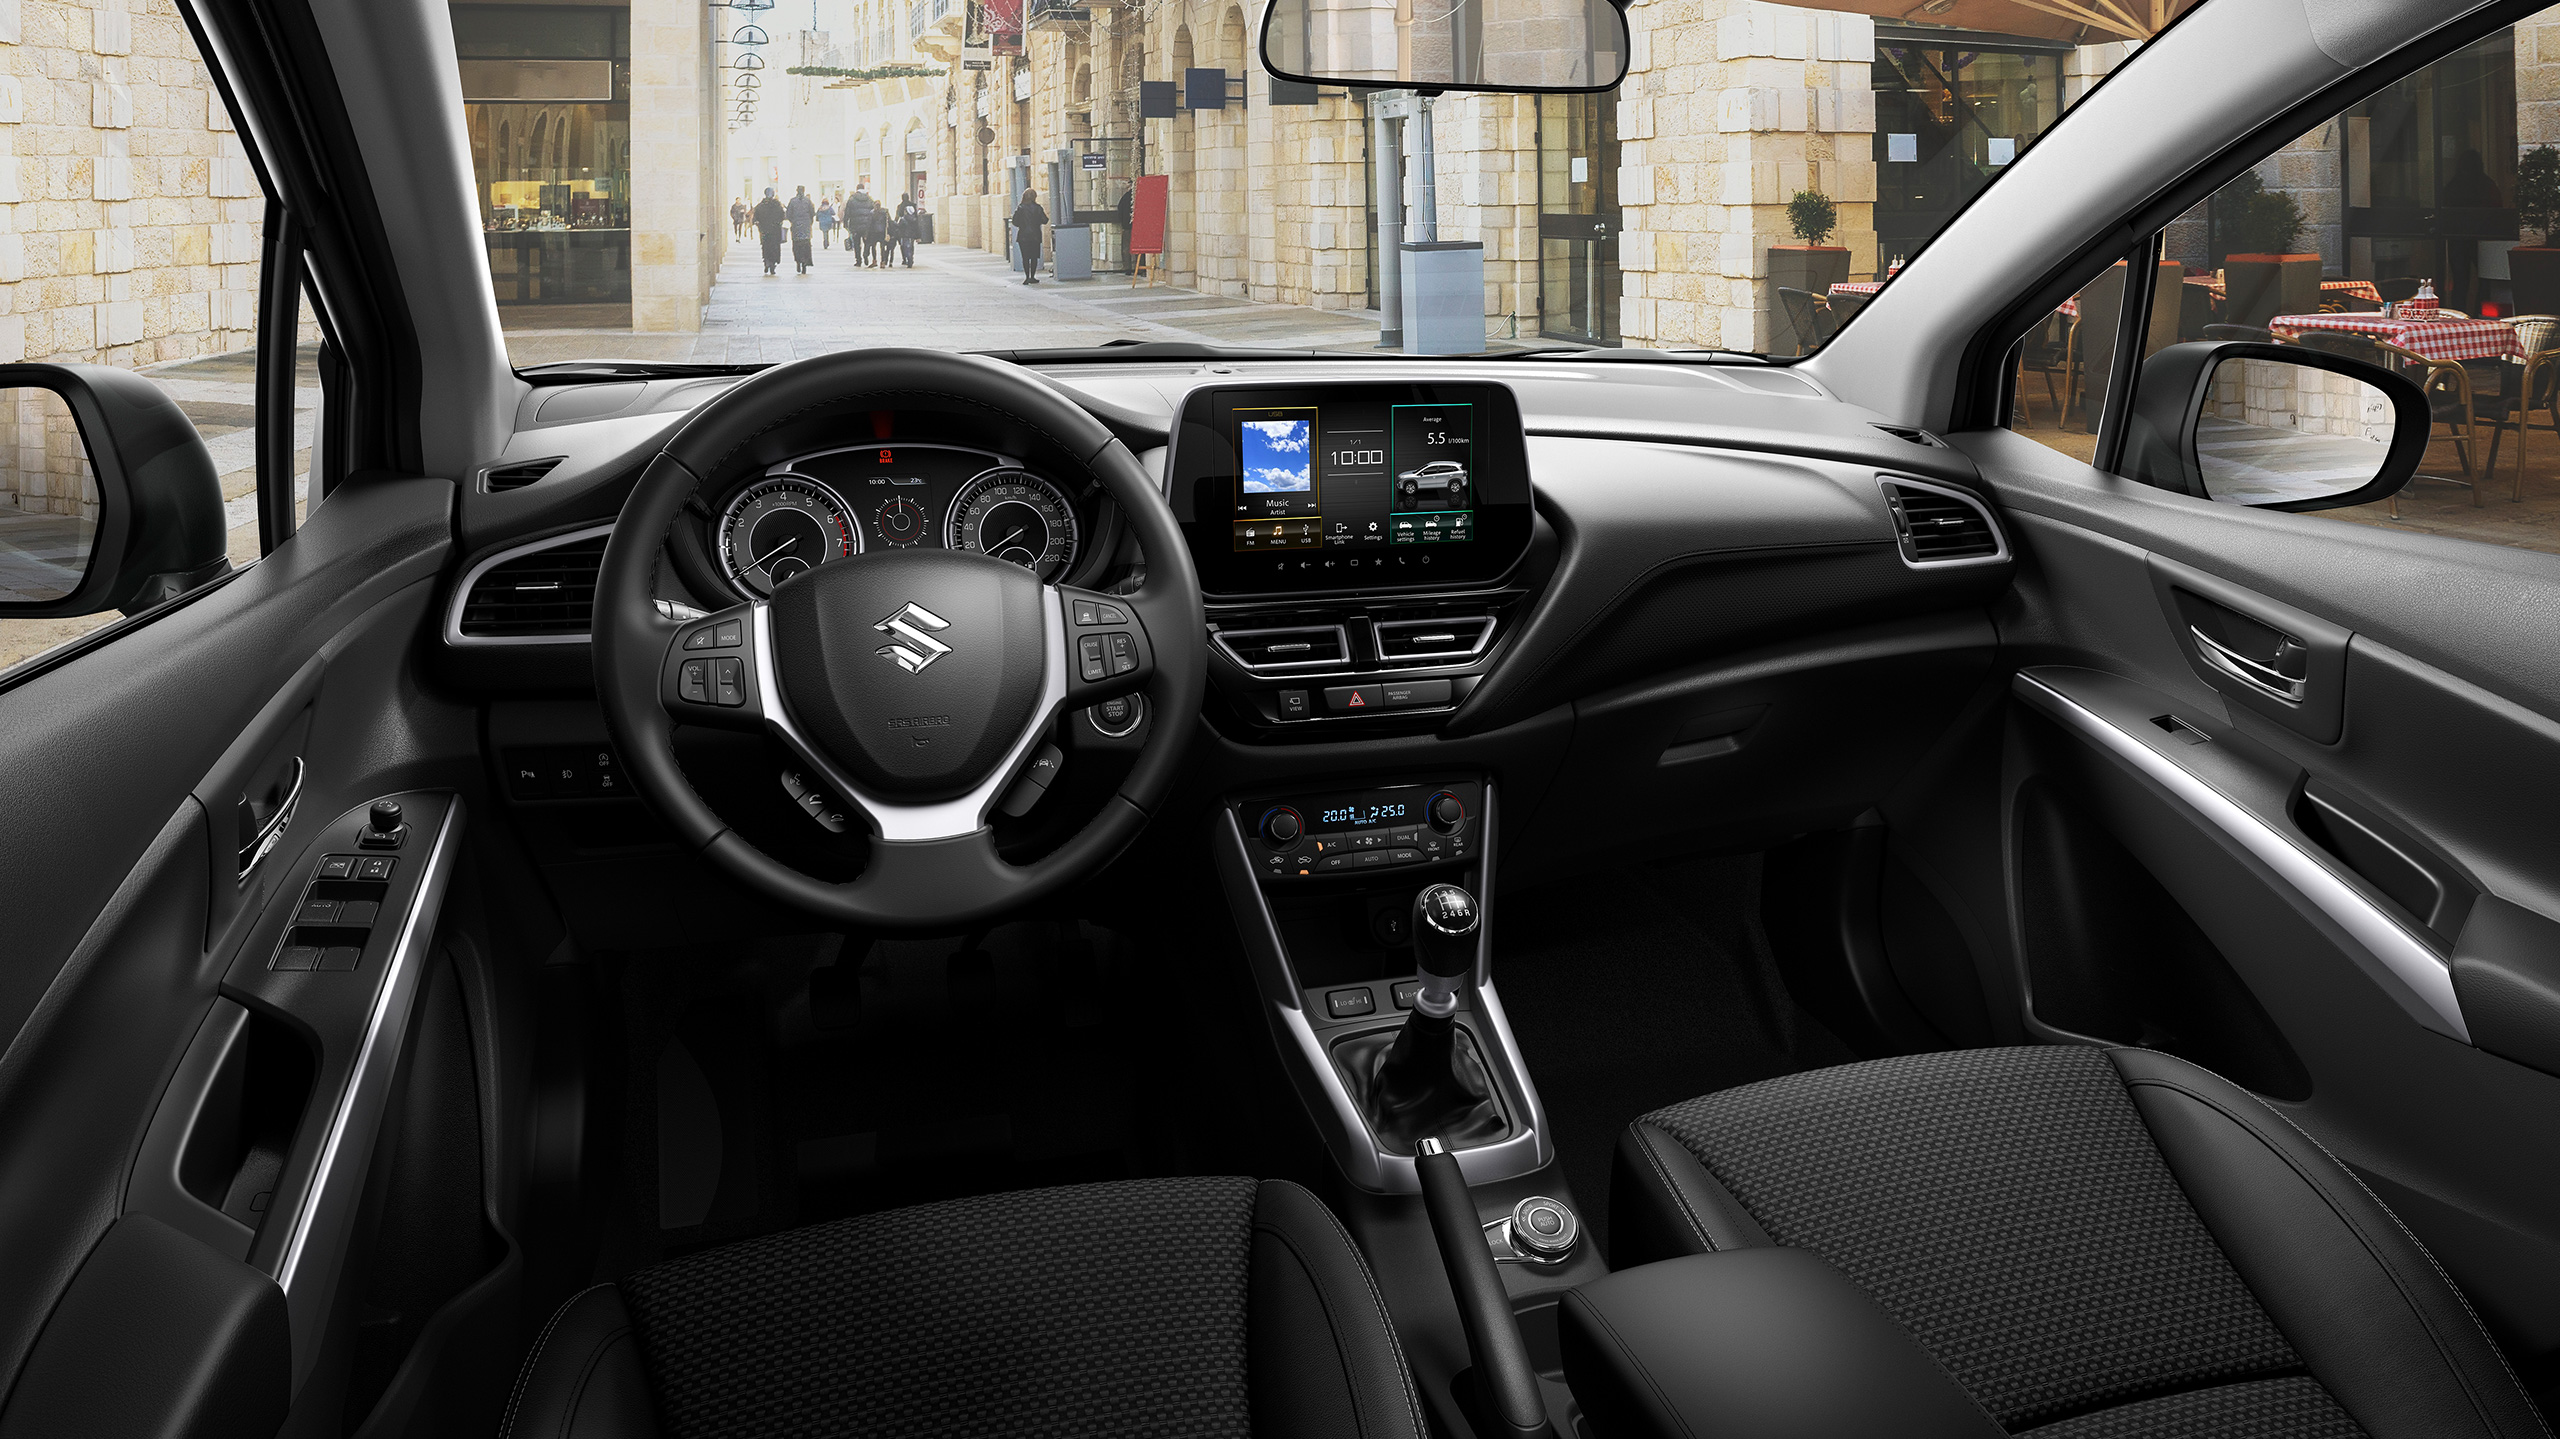 image_from_world_premiere_of_the_all-new_S-CROSS_interior_front